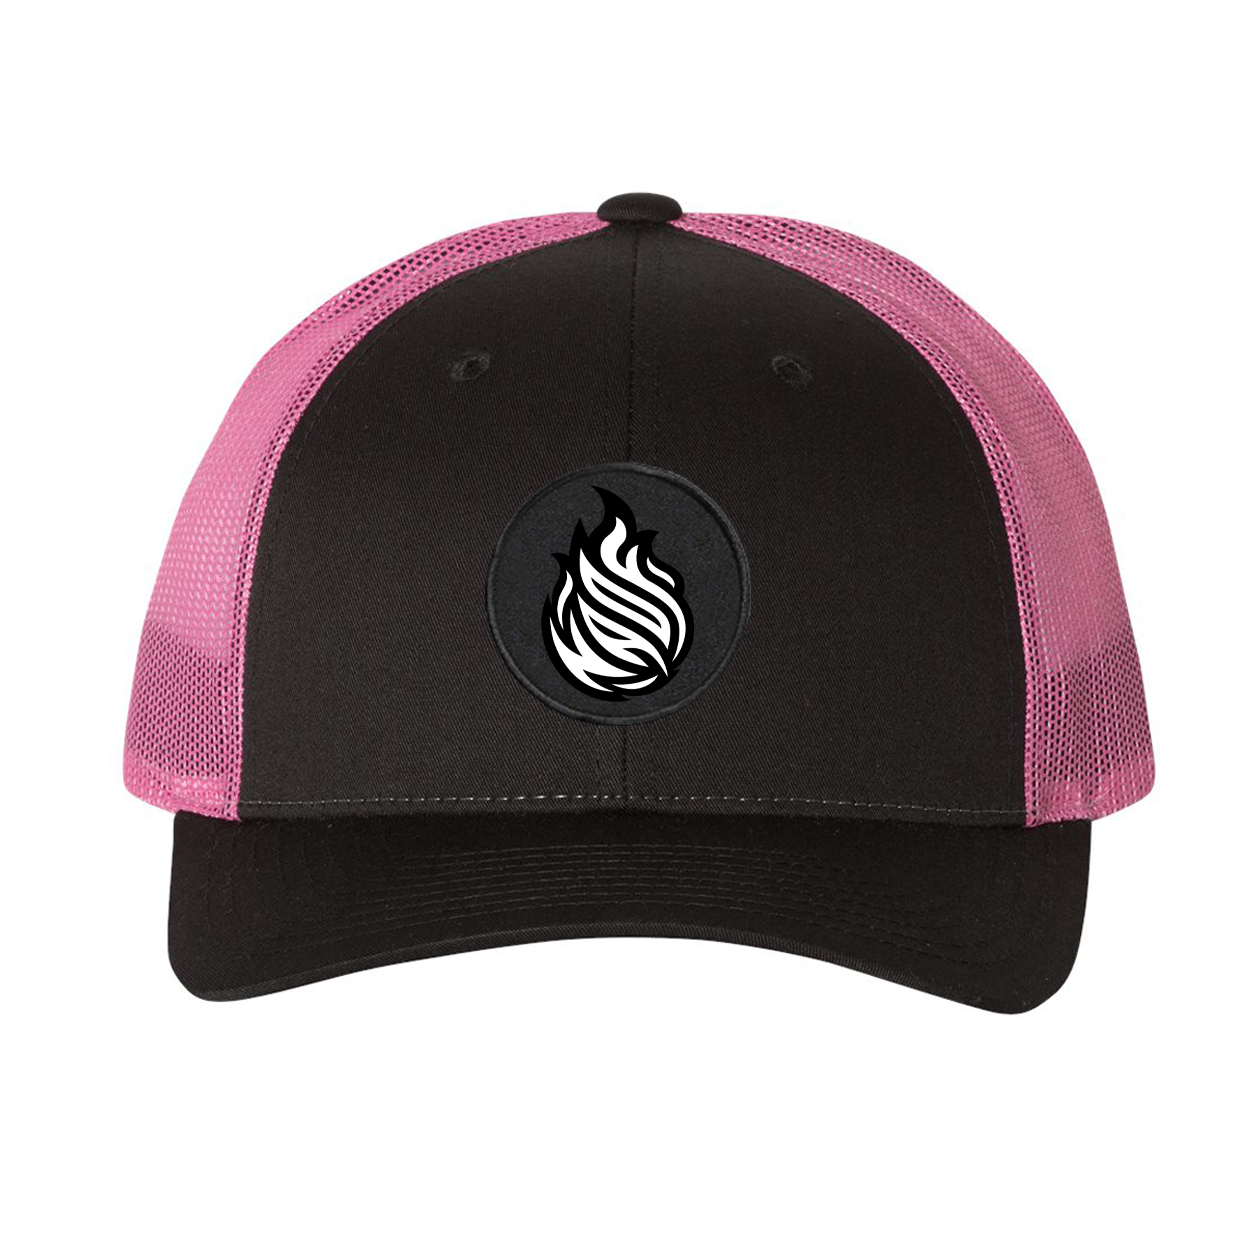 Near An Open Flame Classic Woven Circle Patch Snapback Trucker Hat Gray/Neon Pink (White Logo)